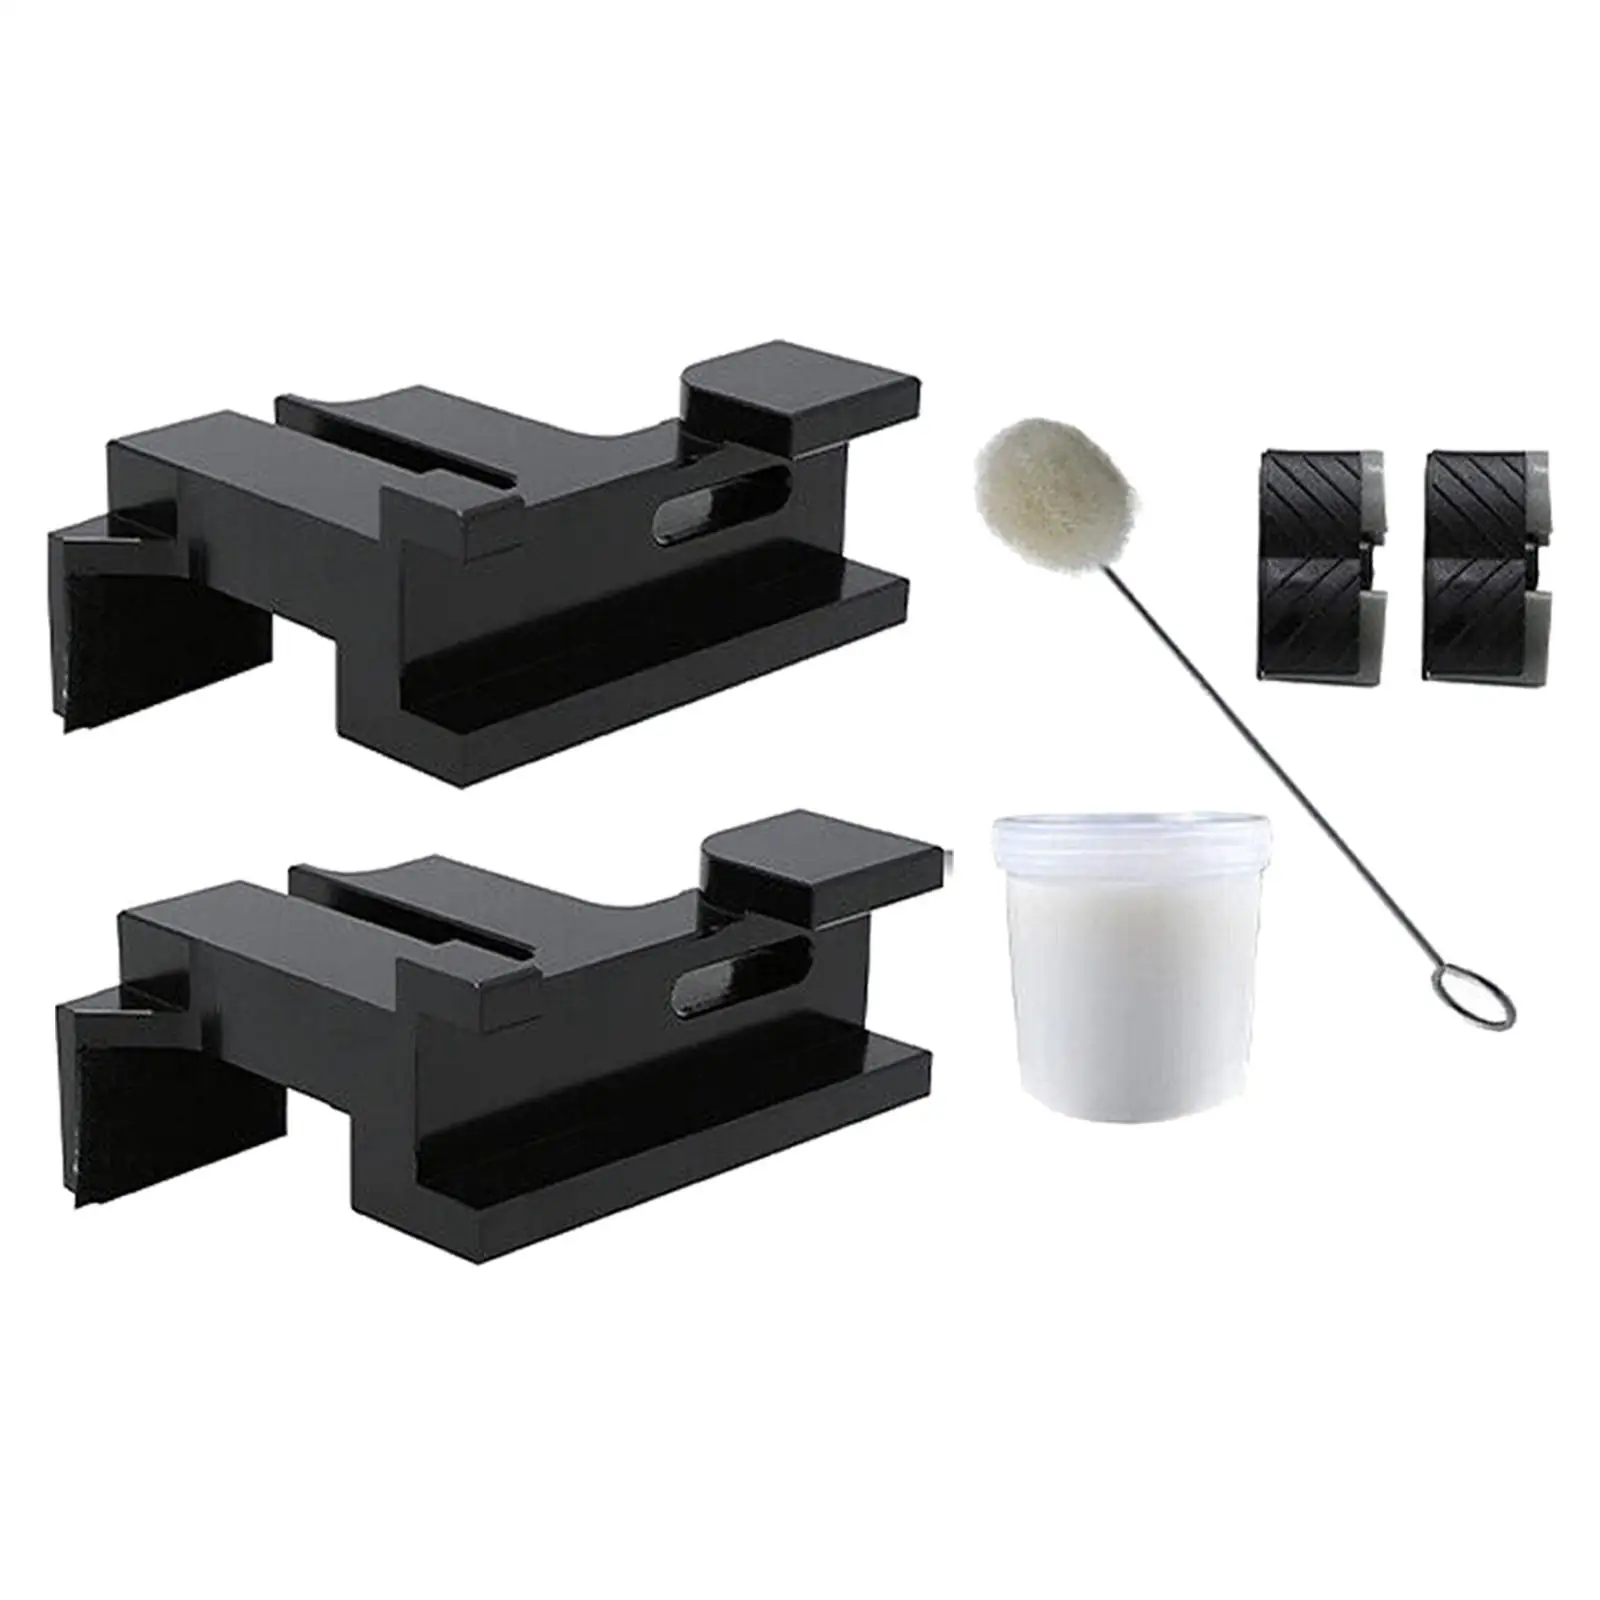 Sunroof Track Assembly Repair Set Replaces Part for Ford Edge (2007-2014)